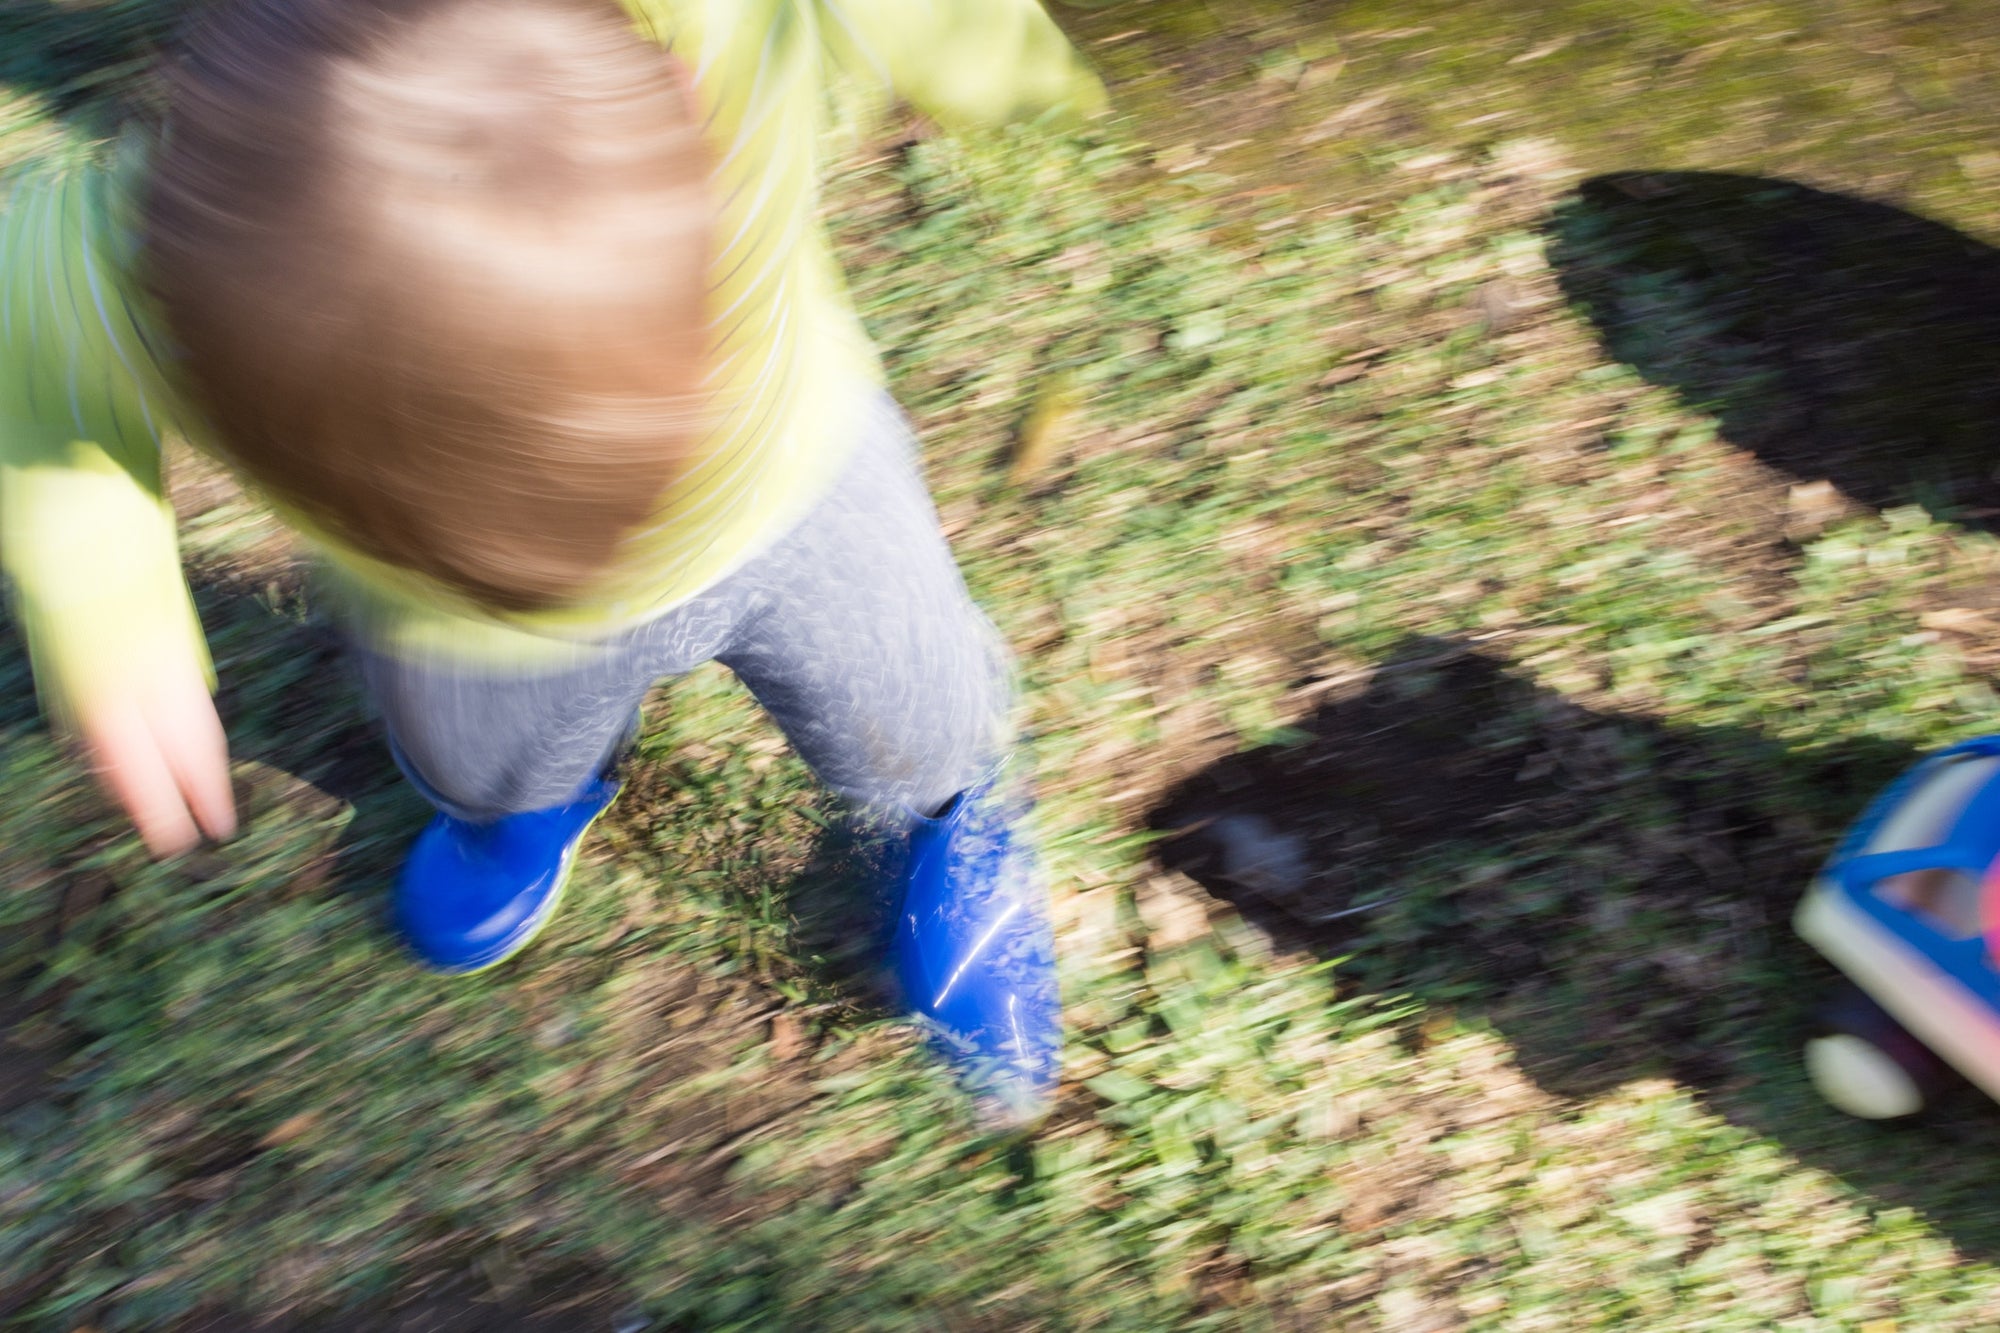 blur image of a kid playing in the garden